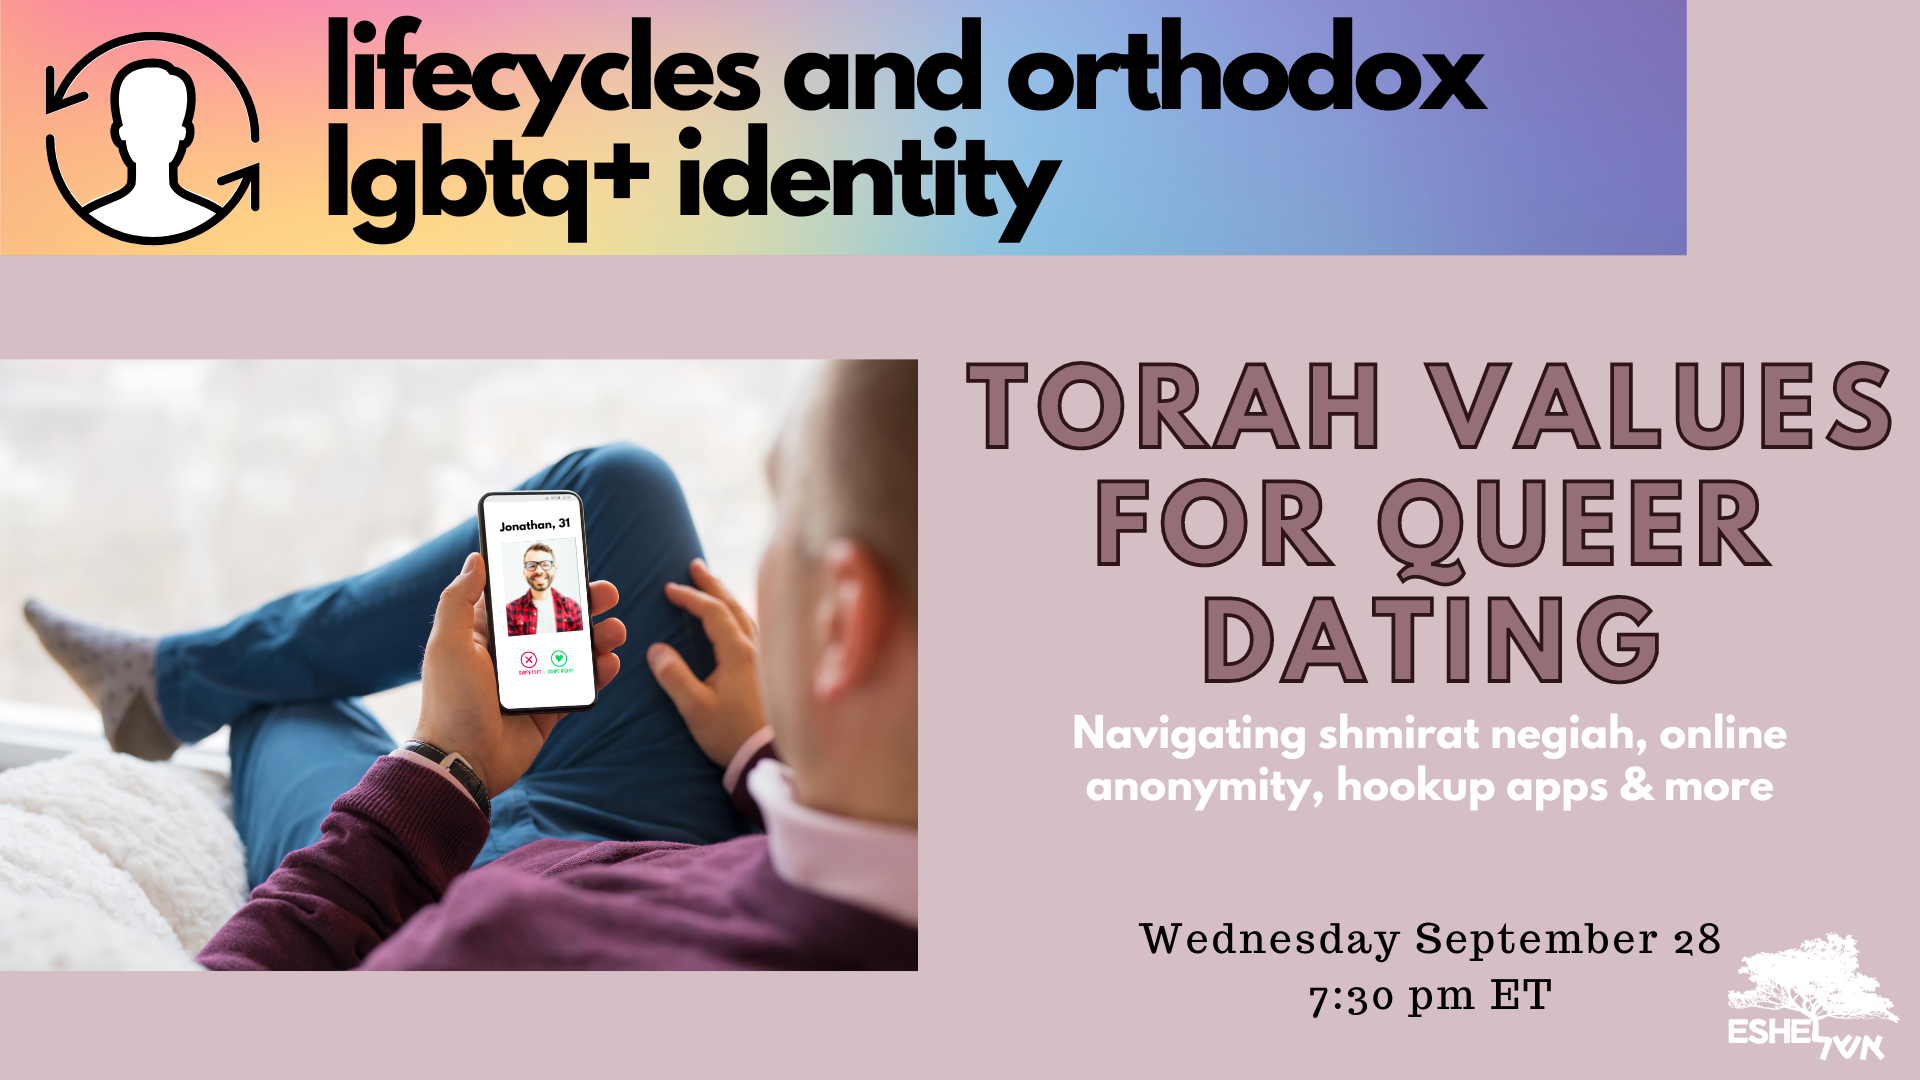 Text: lifecycles and orthodoc lgbtq+ identity, Torah values for queer dating, Navigating shmirat negiah, online anonymity, hookup apps & more, Wednesday September 28 7:30 pm ET. Images: man looking at dating app on cell phone, Eshel logo, icon of person surrounded by arrows indicating a cycle